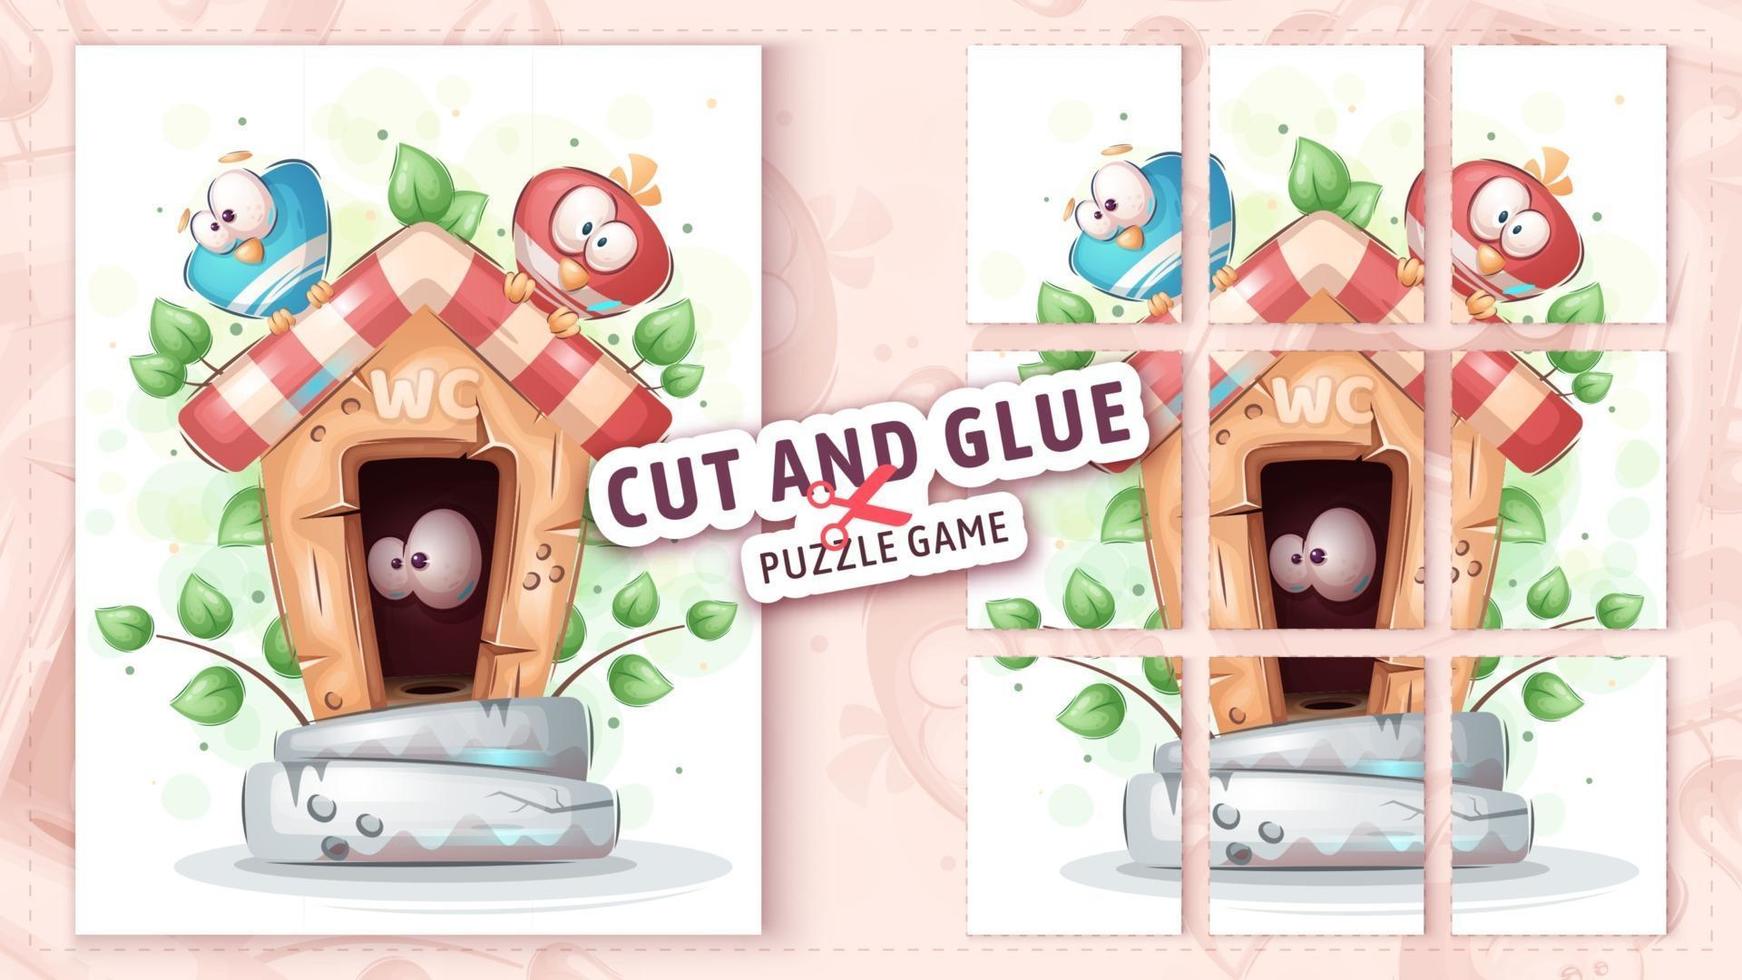 Bird in toilet, cut and glue - puzzle game vector